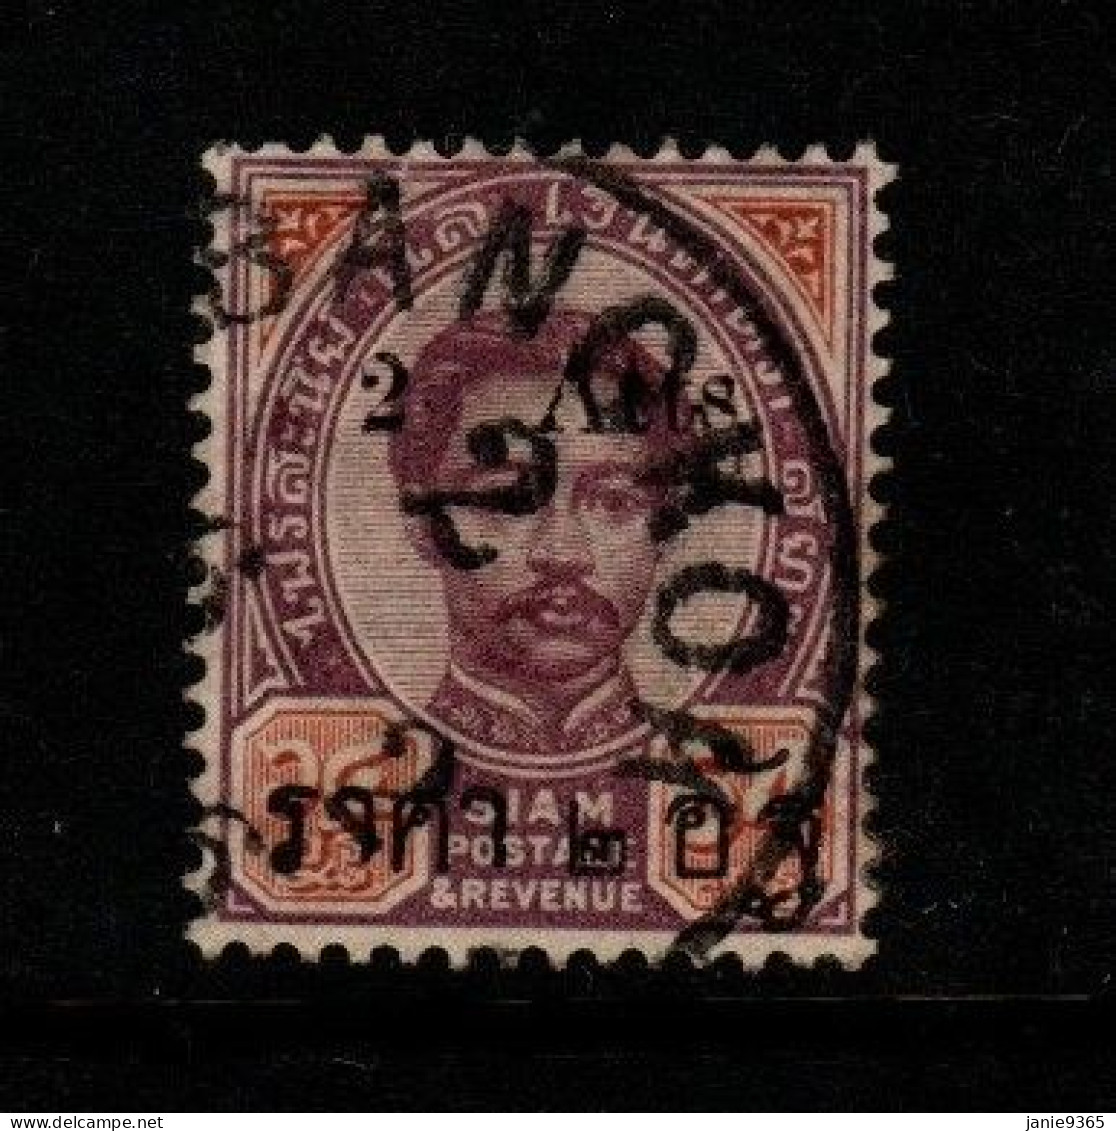 Thailand Cat 68 1899 Surcharged 2 Atts On 64 Atts,used - Thailand